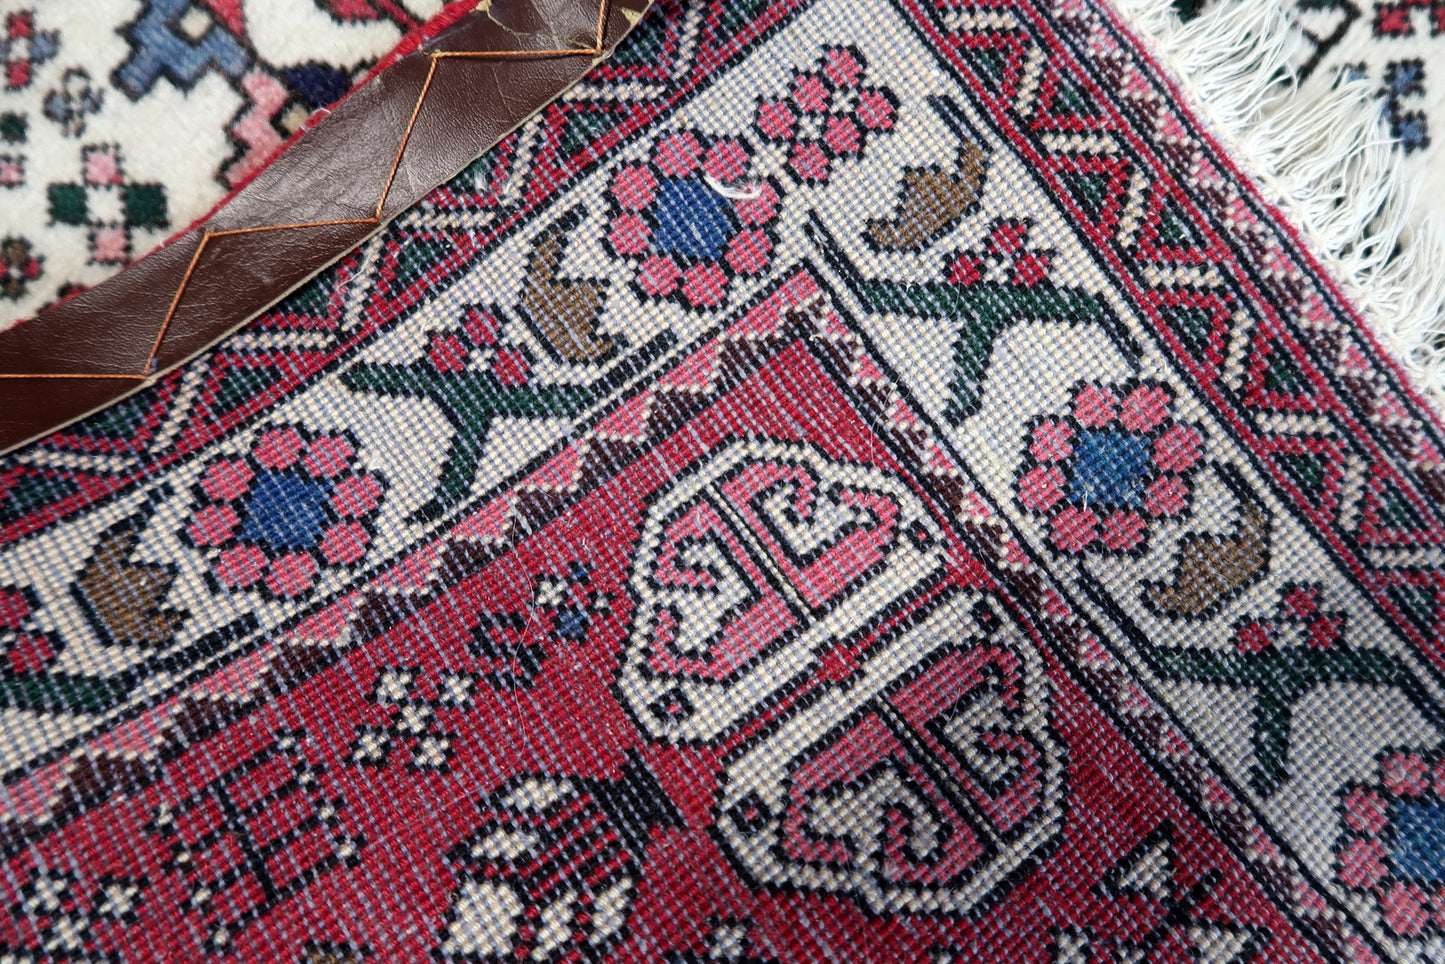 Back view of the vintage Persian Malayer rug highlighting its craftsmanship and size